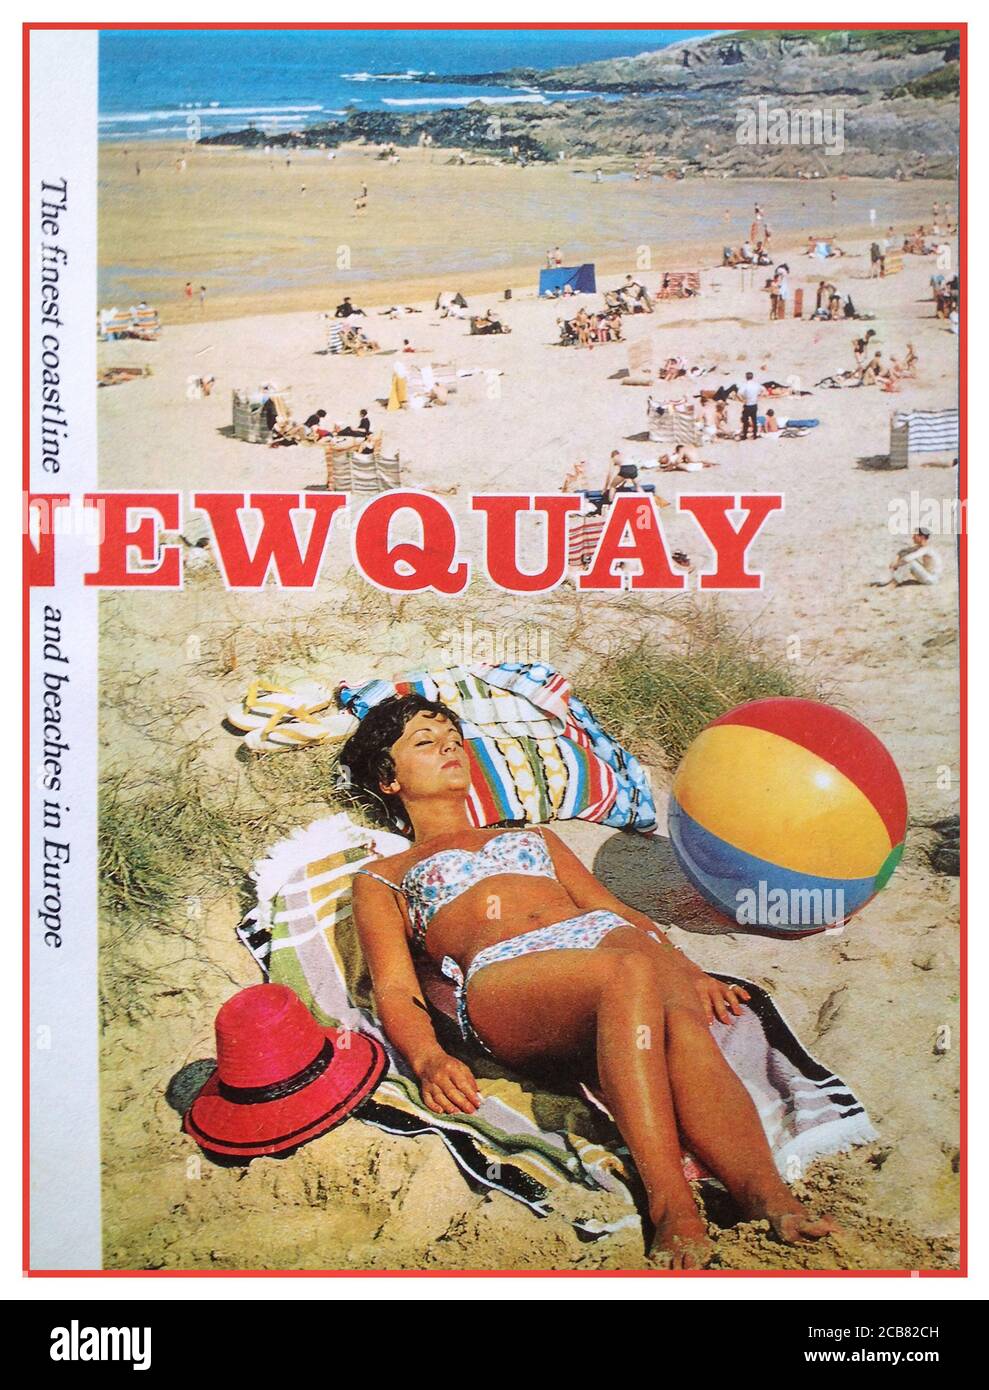 Vintage 1960's Tourist Brochure cover for Newquay Cornwall UK featuring a female sunbather in two piece swimming costume sun hat and beach ball typical 1960's fashion and style of the era sandy beach and coast behind Stock Photo